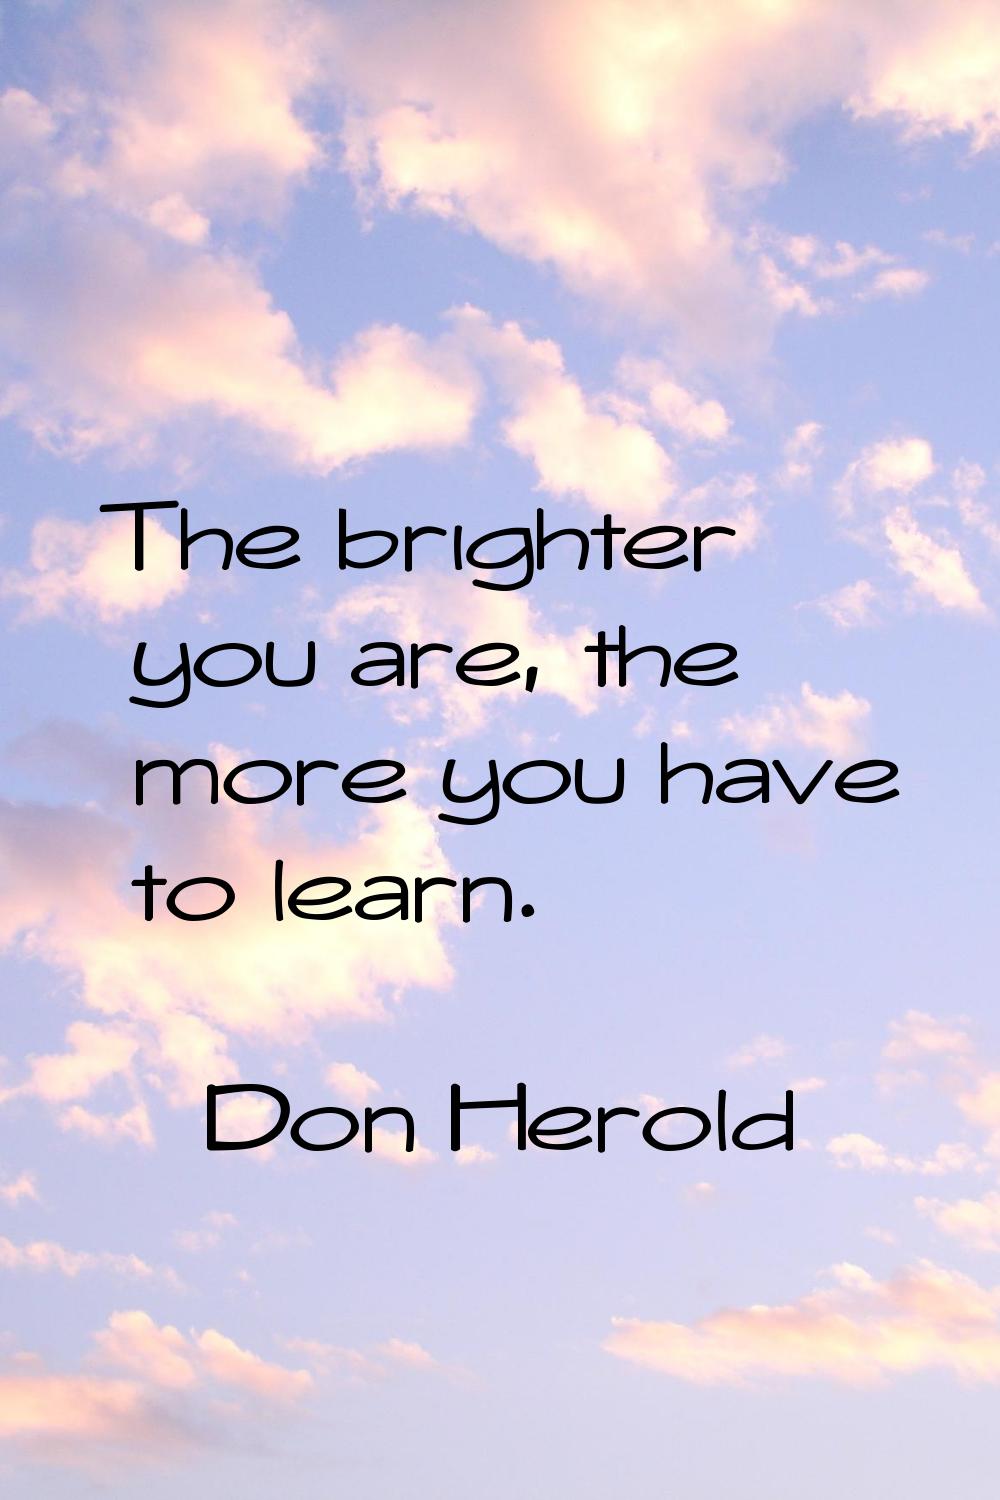 The brighter you are, the more you have to learn.